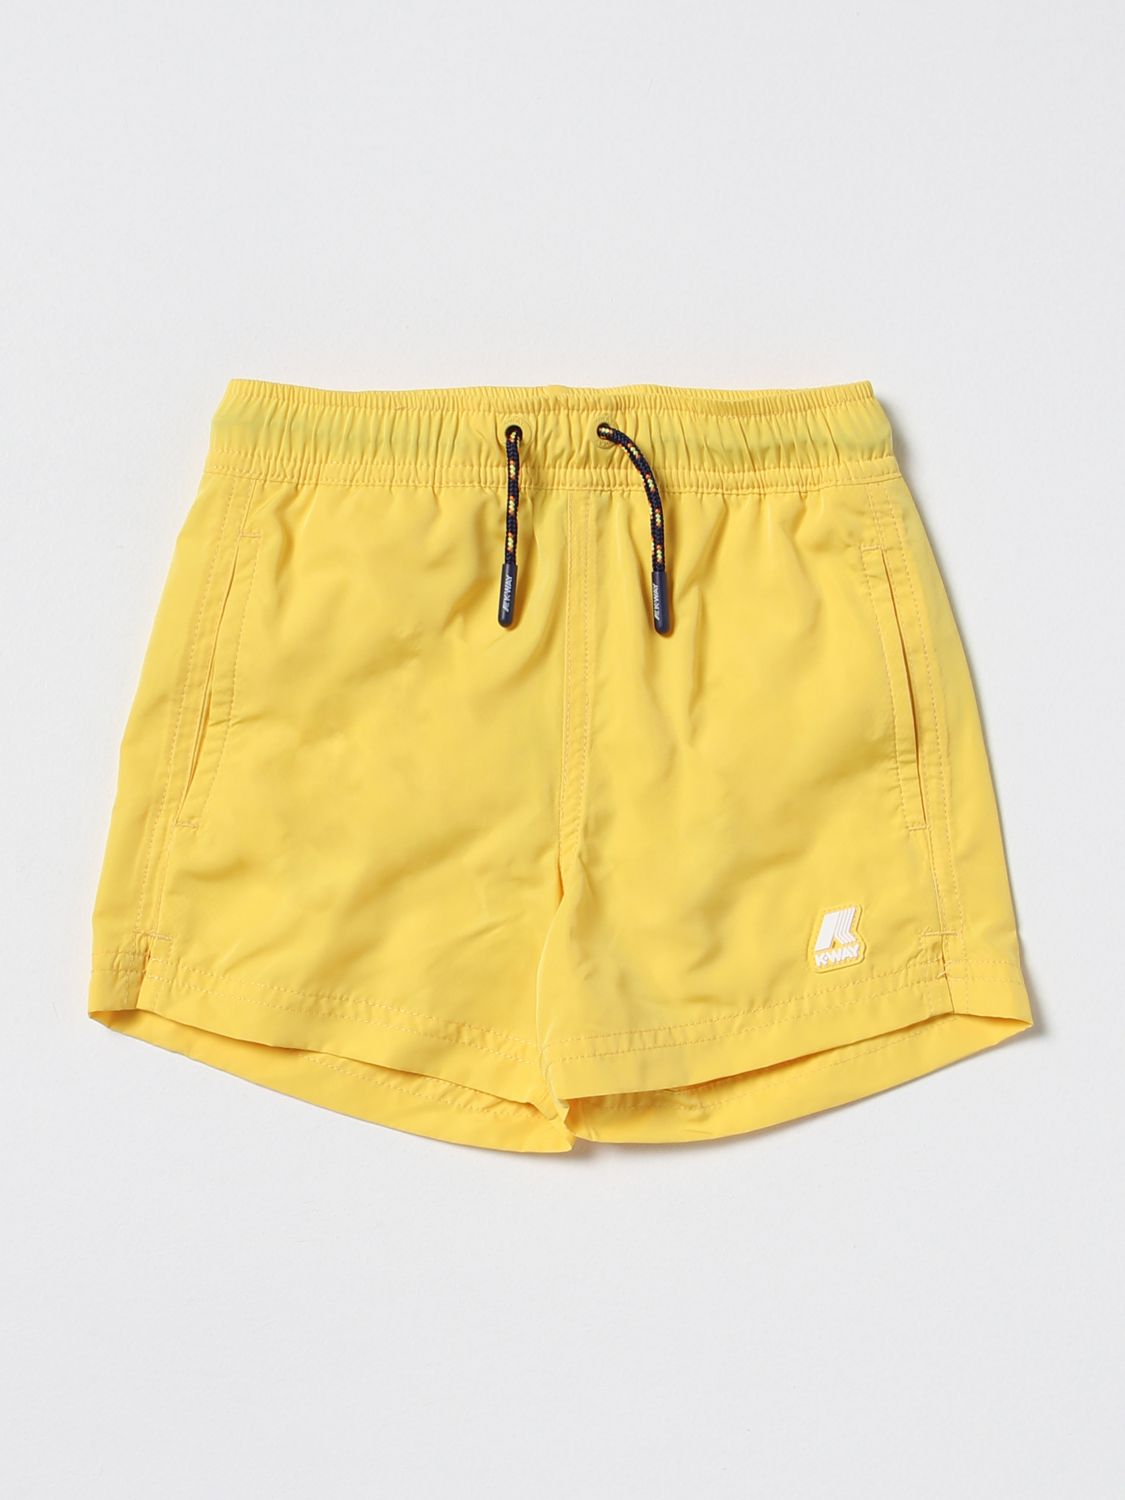 K-way Swimsuit  Kids Color Yellow